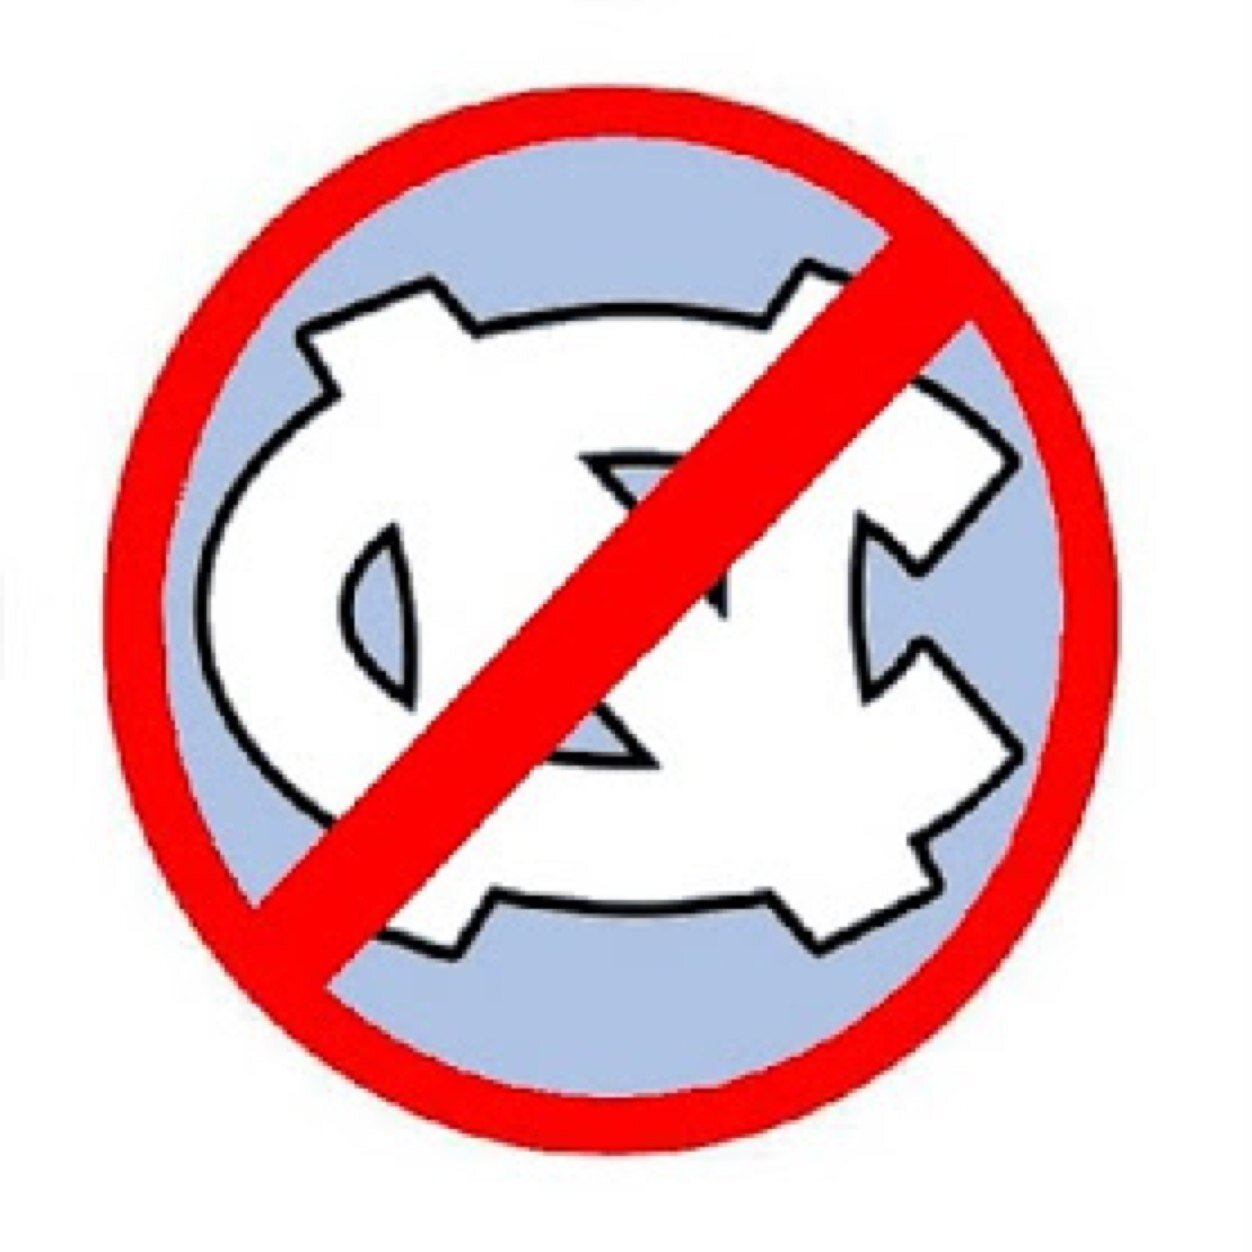 A dedication to the worst fanbase on the planet... The UNC Tarhole faithful.